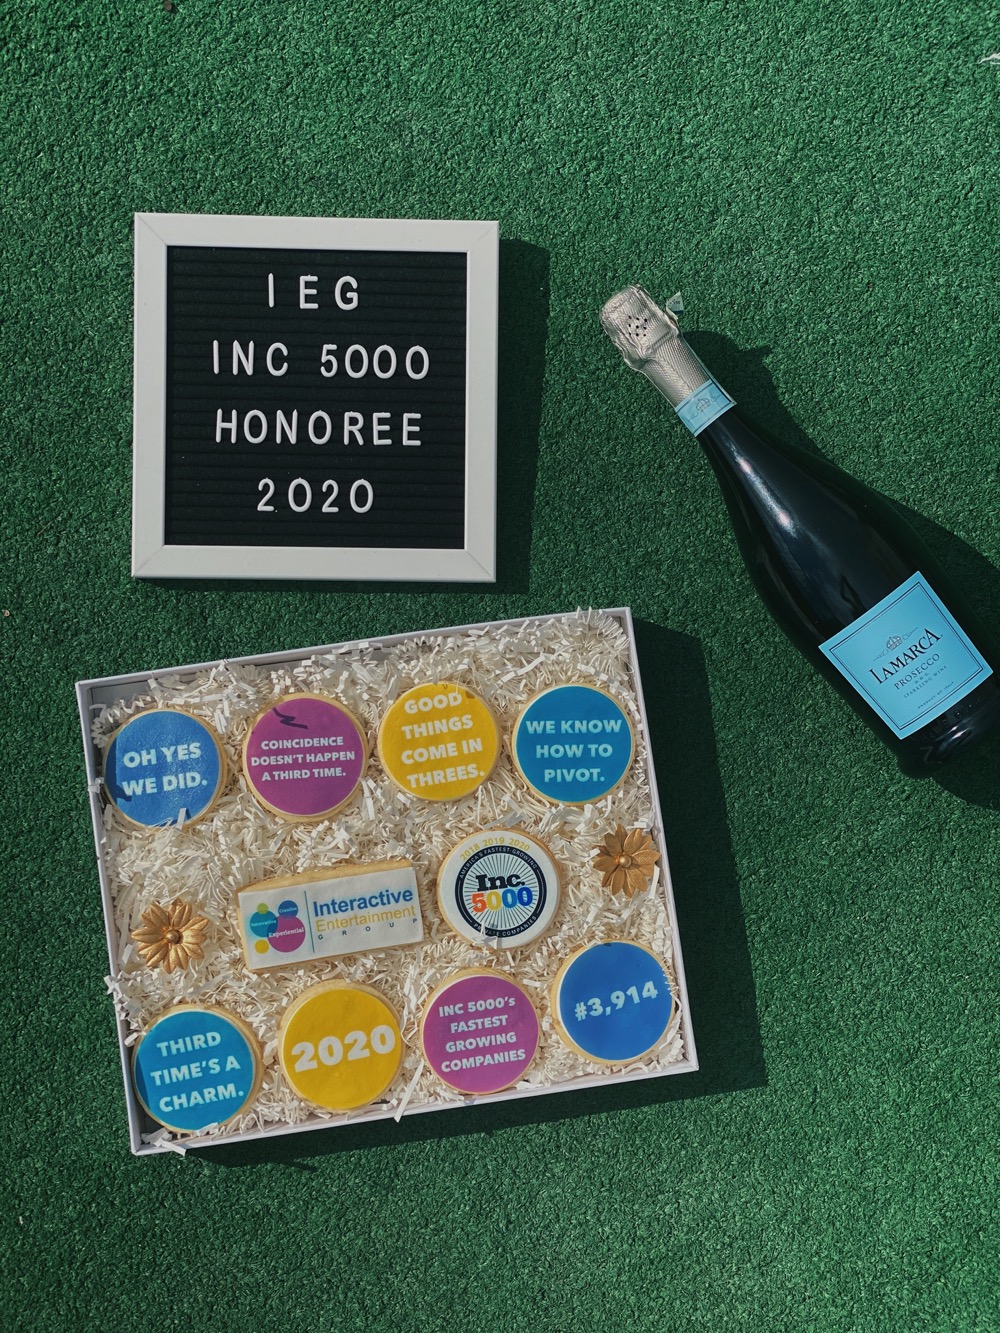 IEG celebrates the honor with cookies and champagne.